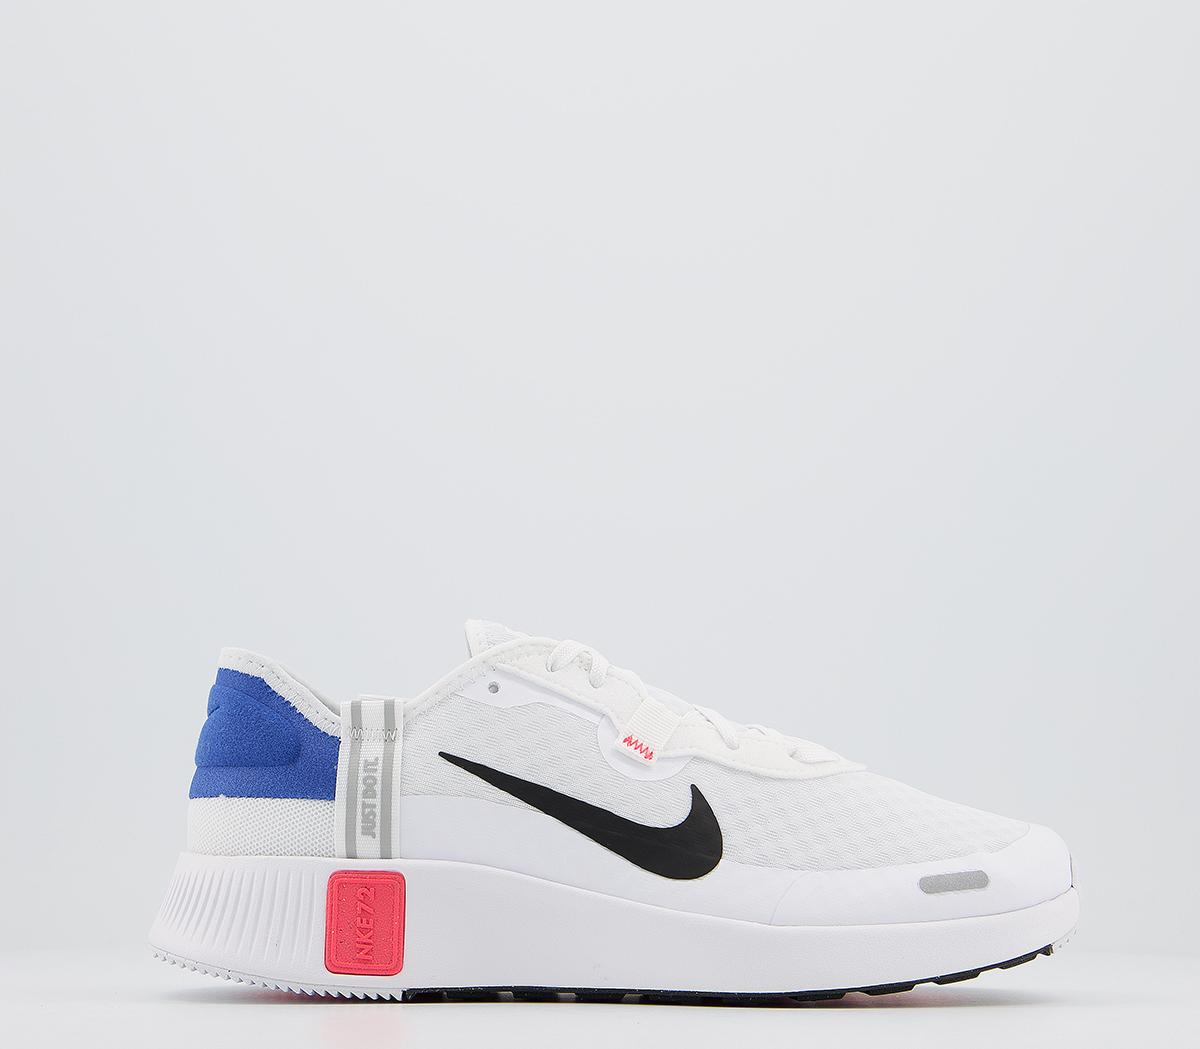 NikeProject X Gs TrainersWhite Blue Red